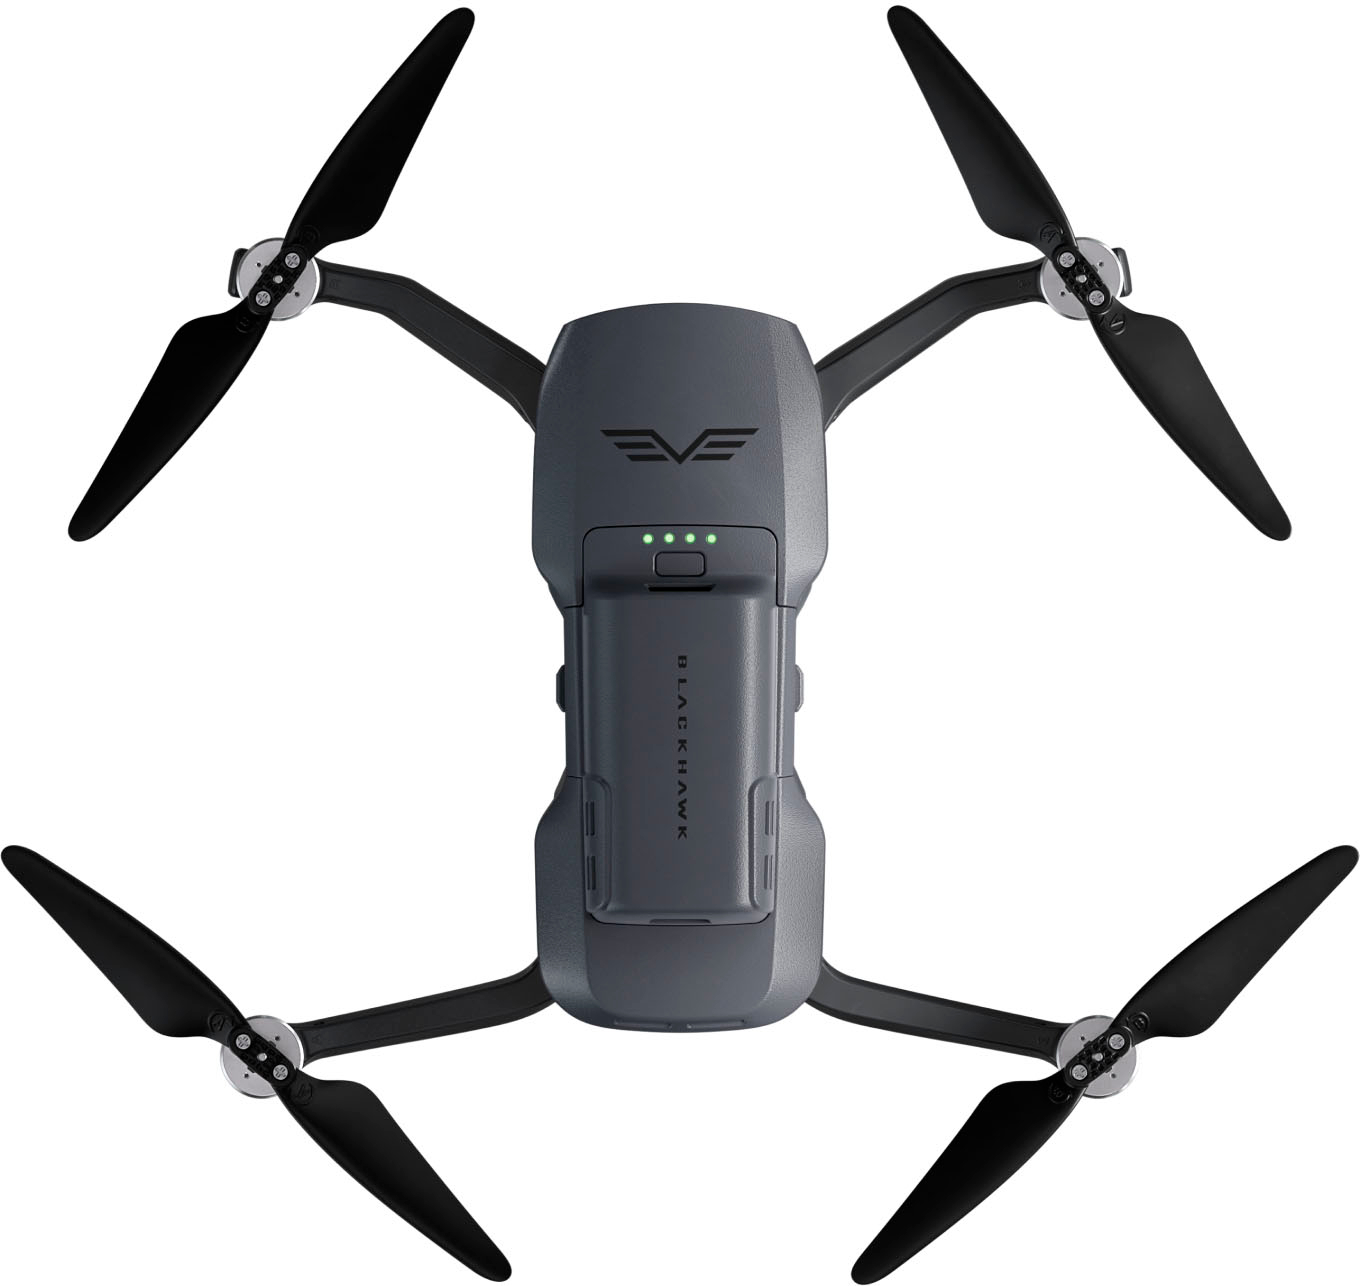 Angle View: EXO Drones - Blackhawk 3 Pro Drone and Remote Control (Android and iOS compatible) - Black